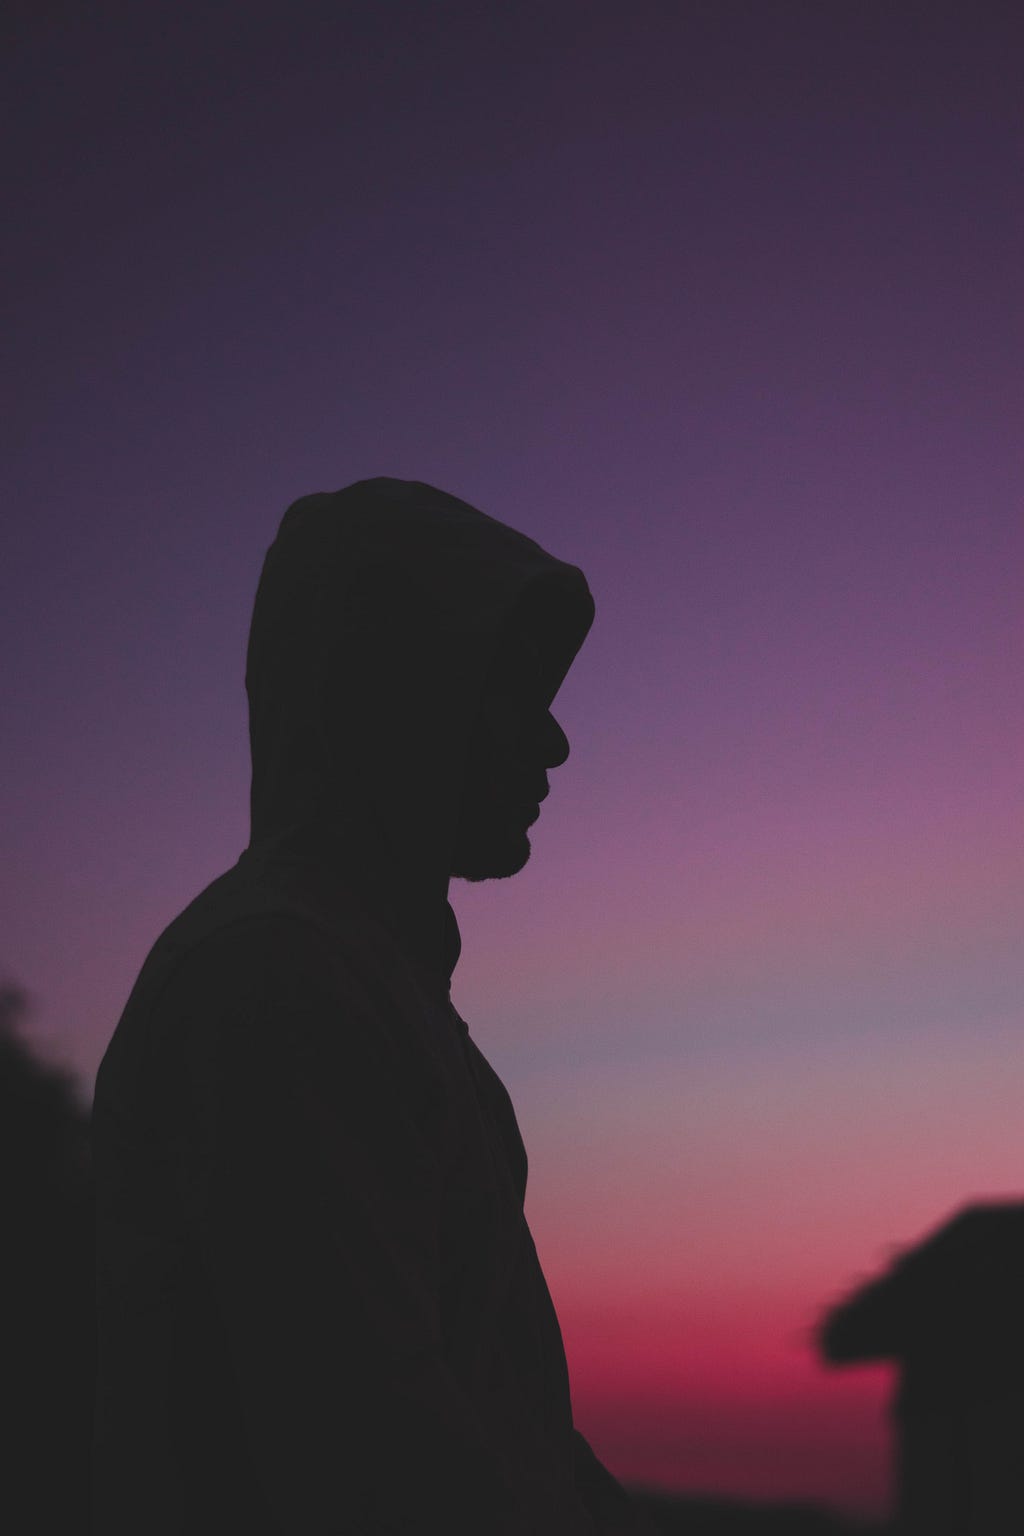 A person silhouetted against a sunset — photo by Dilan NaGi on Unsplash.